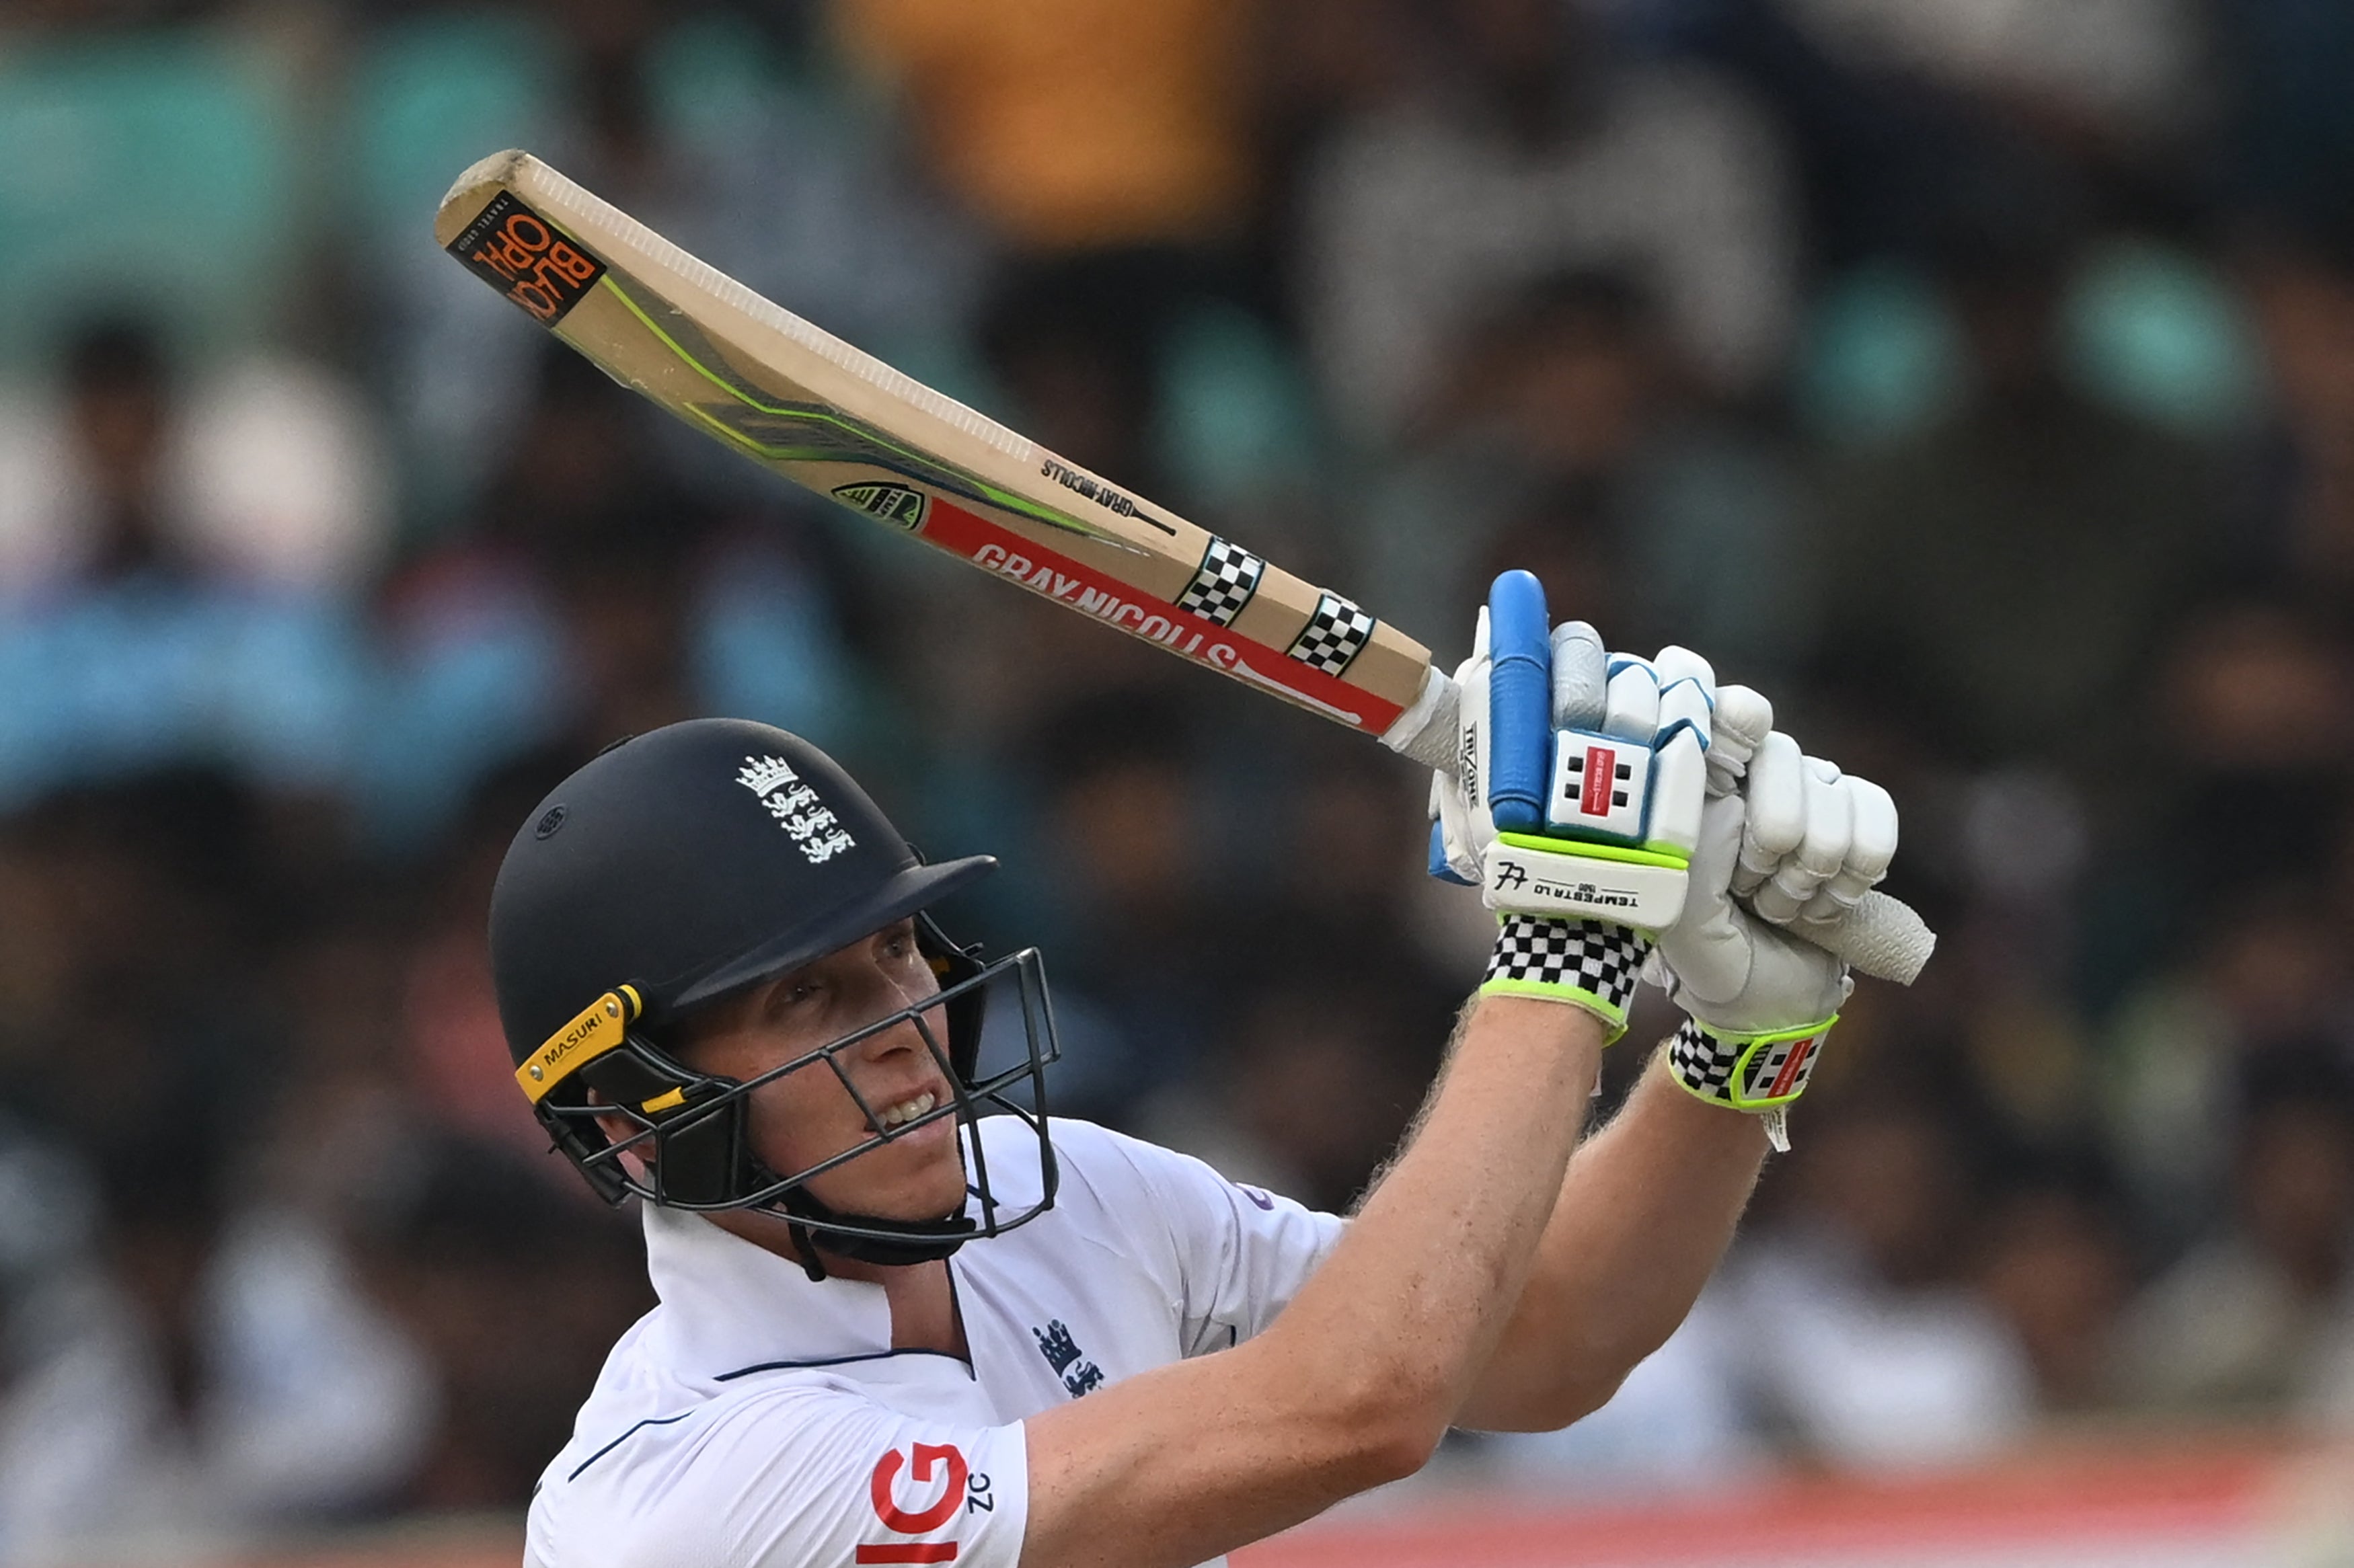 England were set 399 runs to win by India in the fourth innings of the second Test match